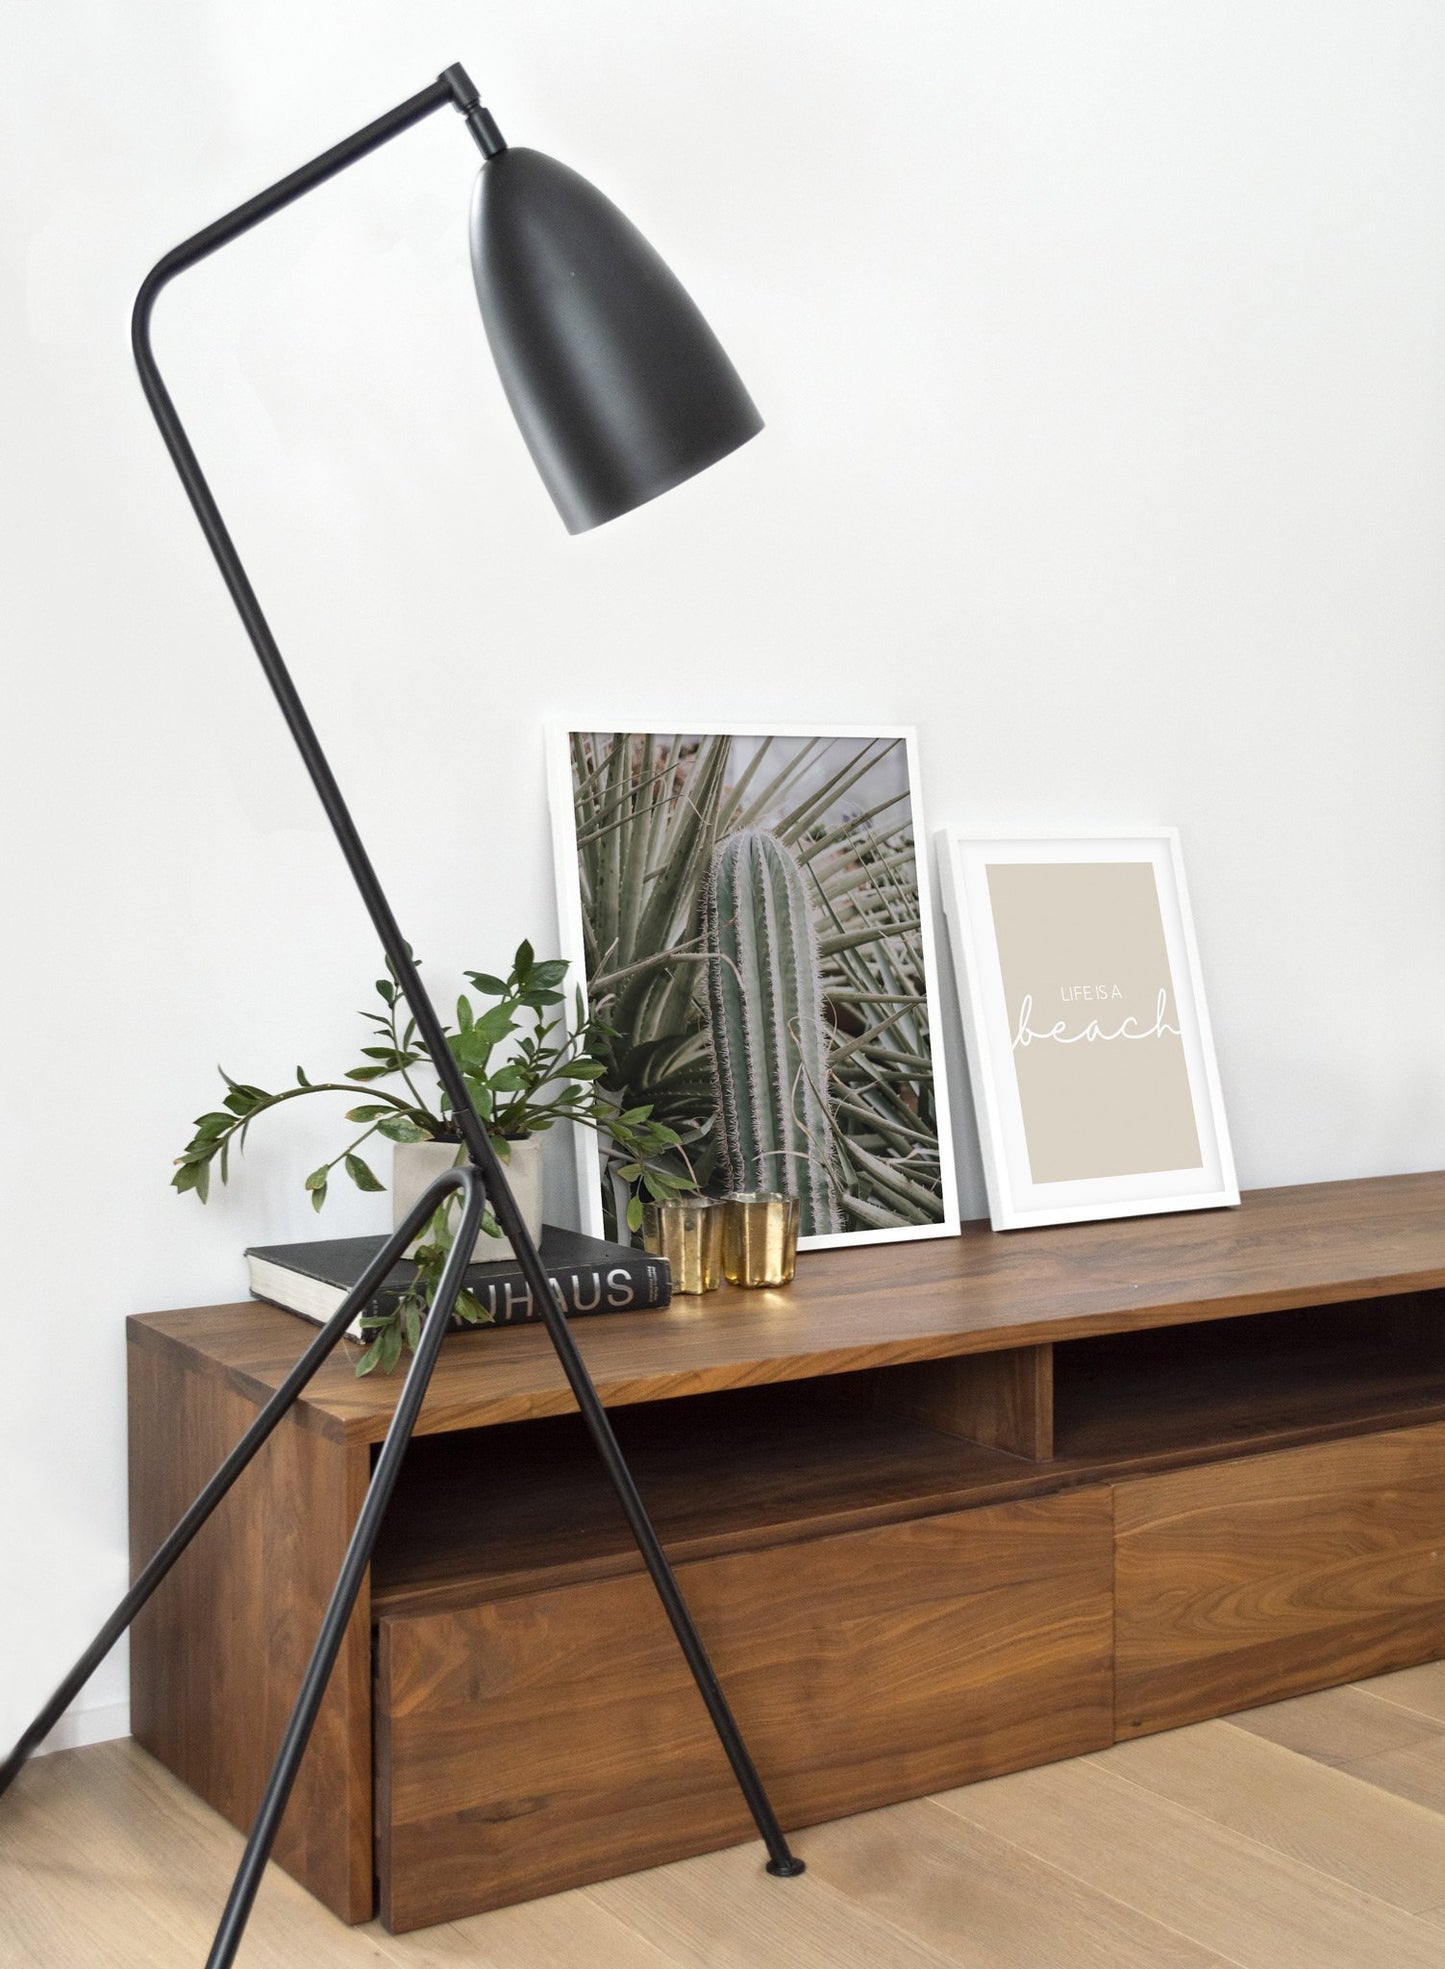 Cactus in nature modern minimalist botanical photography poster by Opposite Wall - Living room with gallery Wall duo